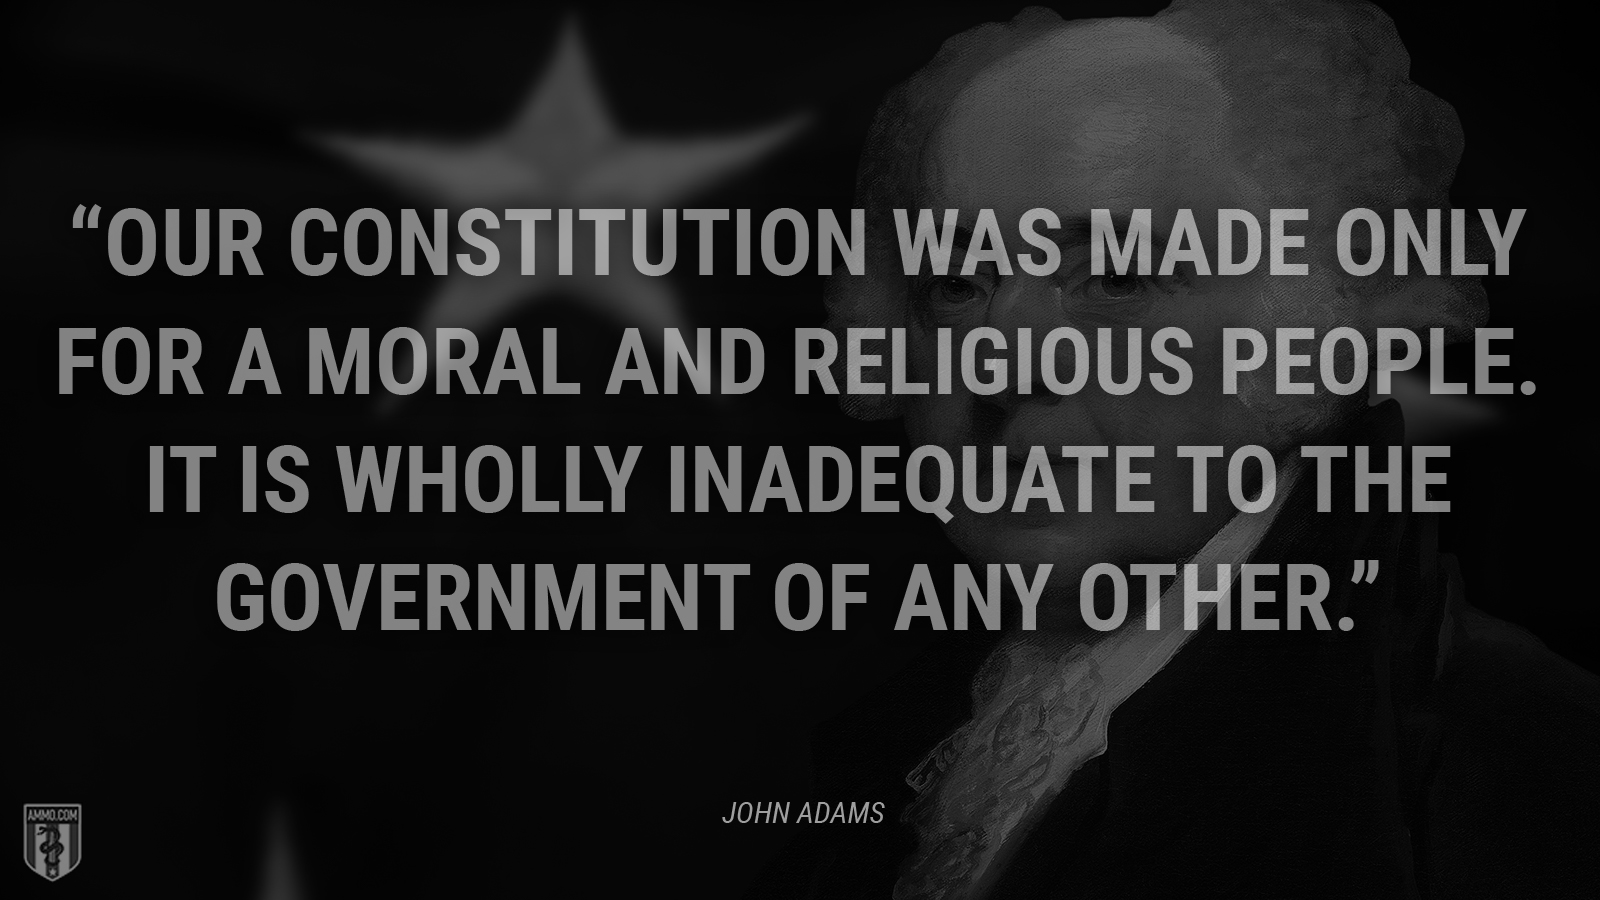 “Our Constitution was made only for a moral and religious people. It is wholly inadequate to the government of any other.” - John Adams